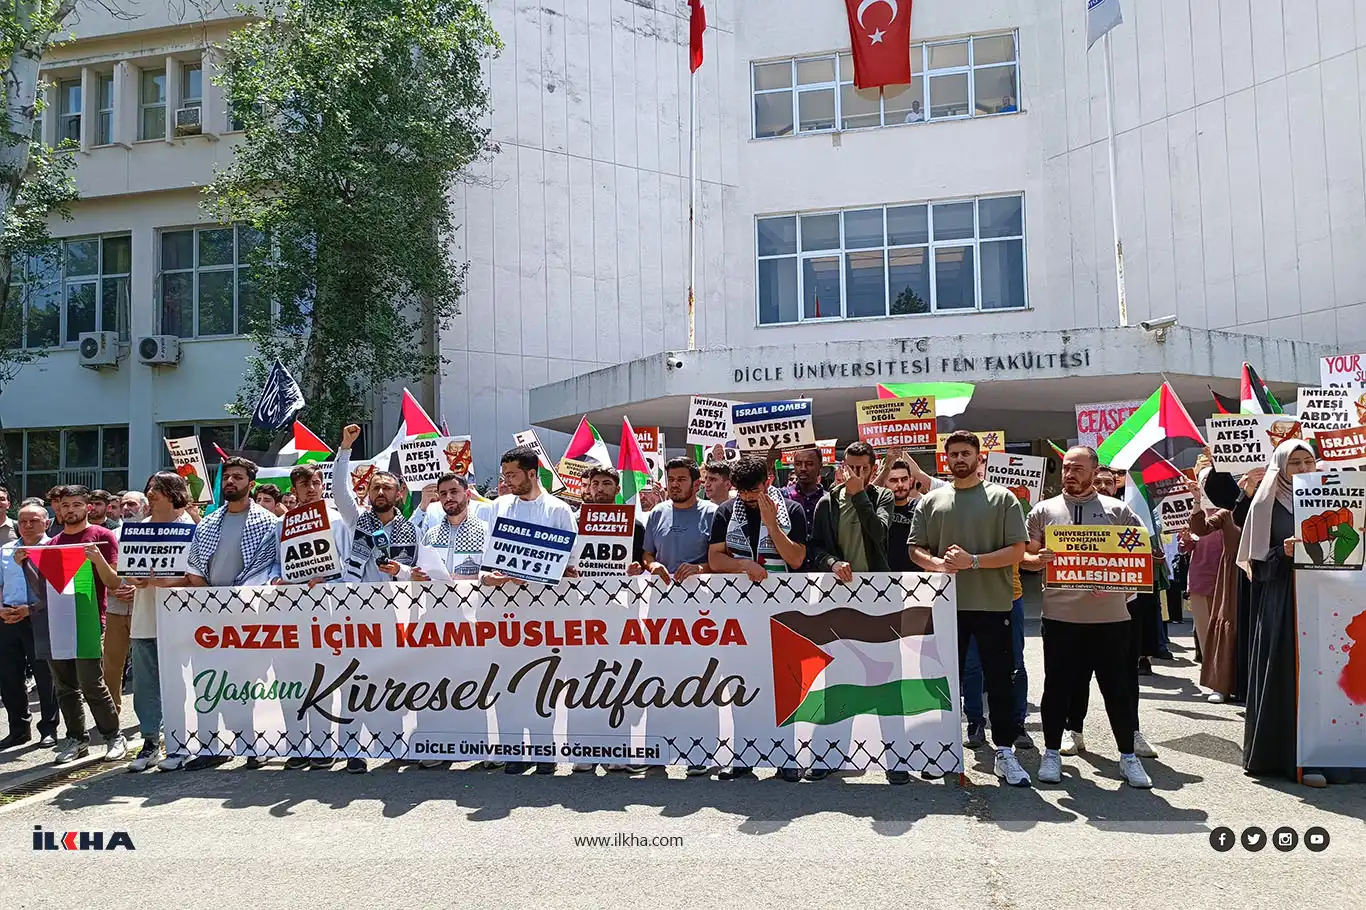 Students in Diyarbakır rally against israeli genocide, support US Gaza demonstrations